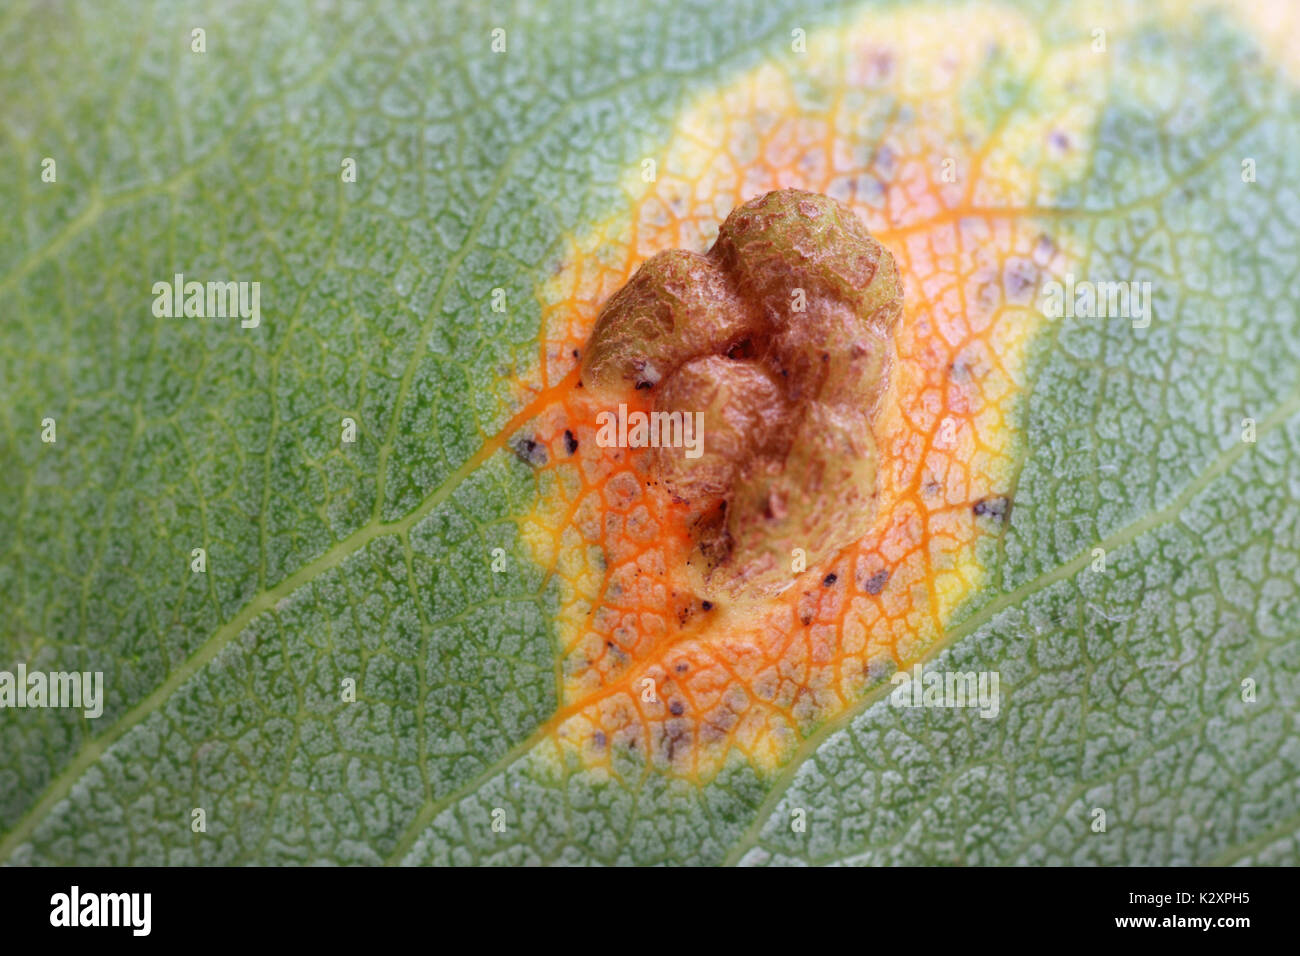 Macro image of the underside of a pear leaf showing a fungal infection which produces galls that harbour the spores. Stock Photo